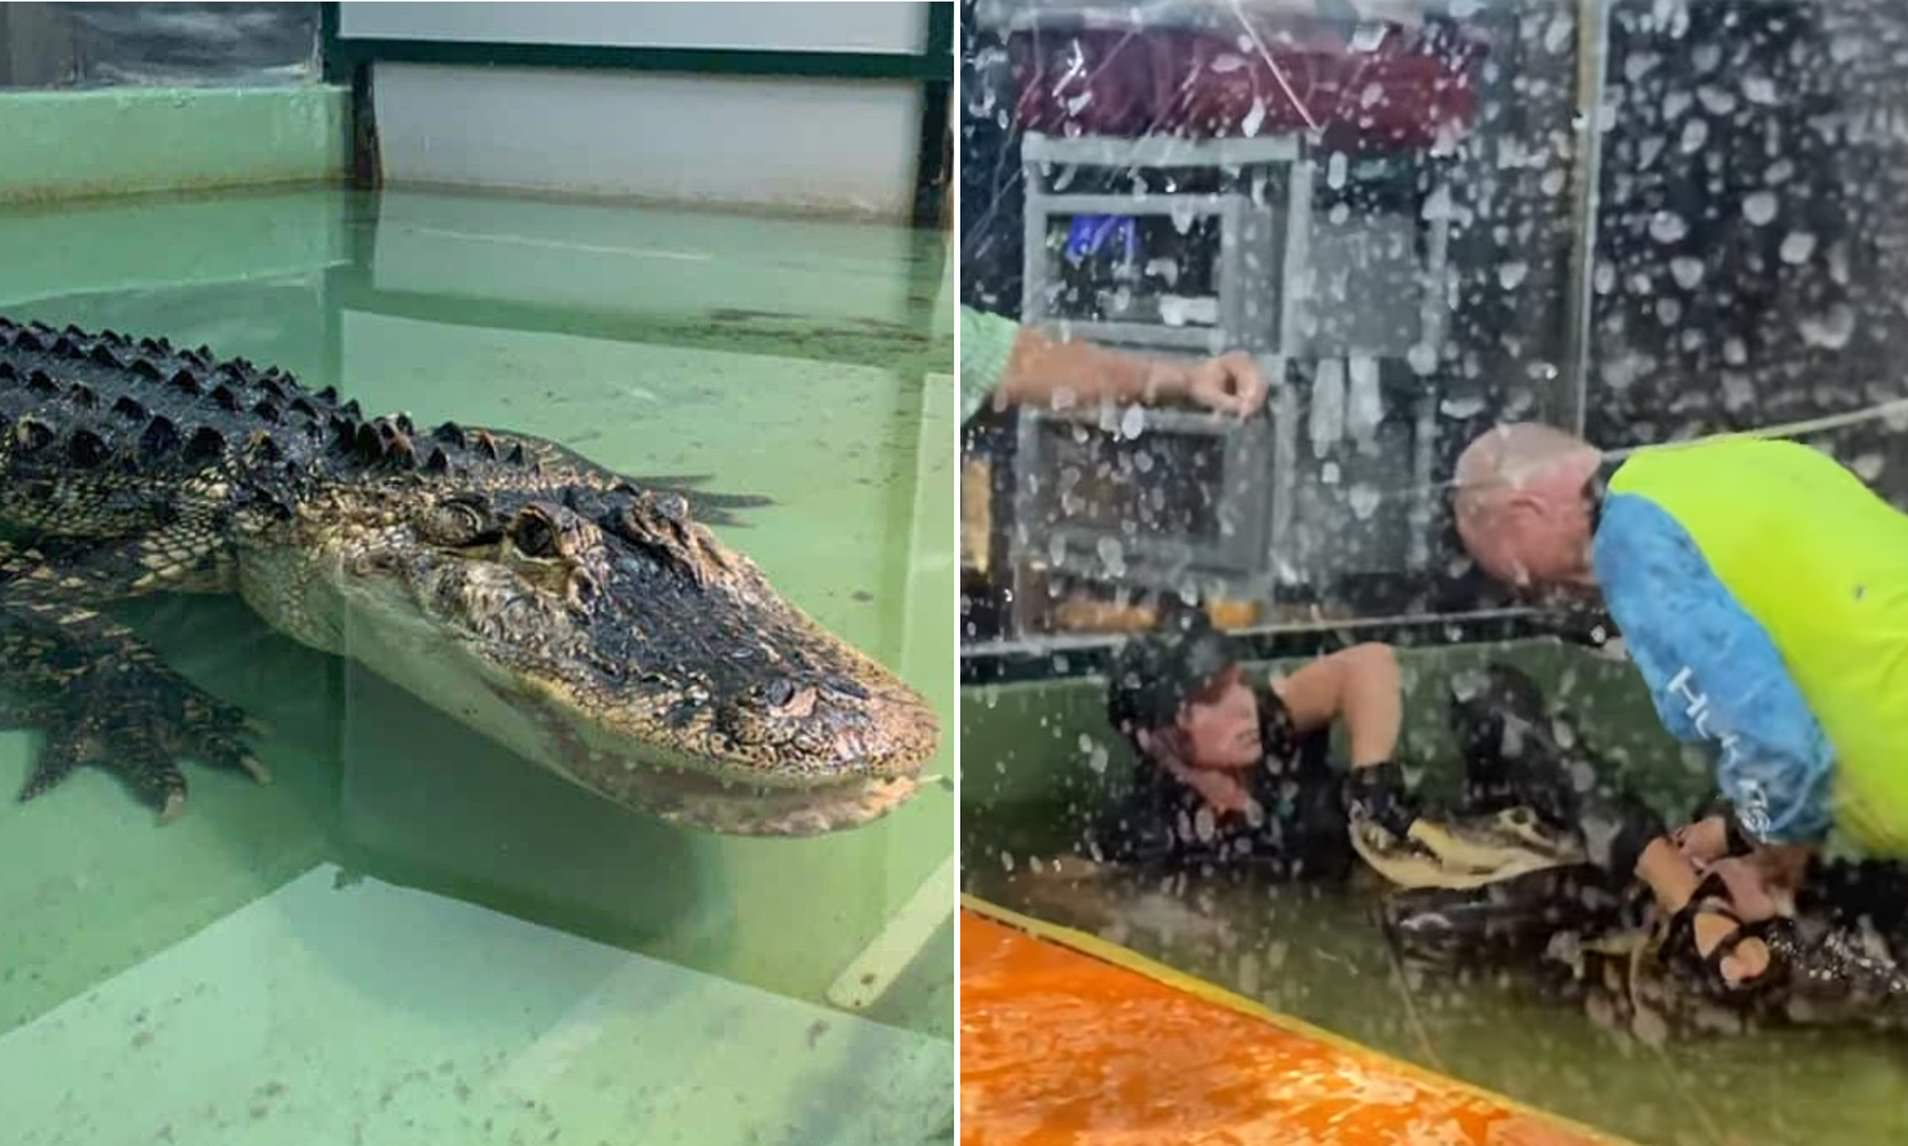 Women Animal trainer saved in alligator attack after bystander leaps on reptile’s back